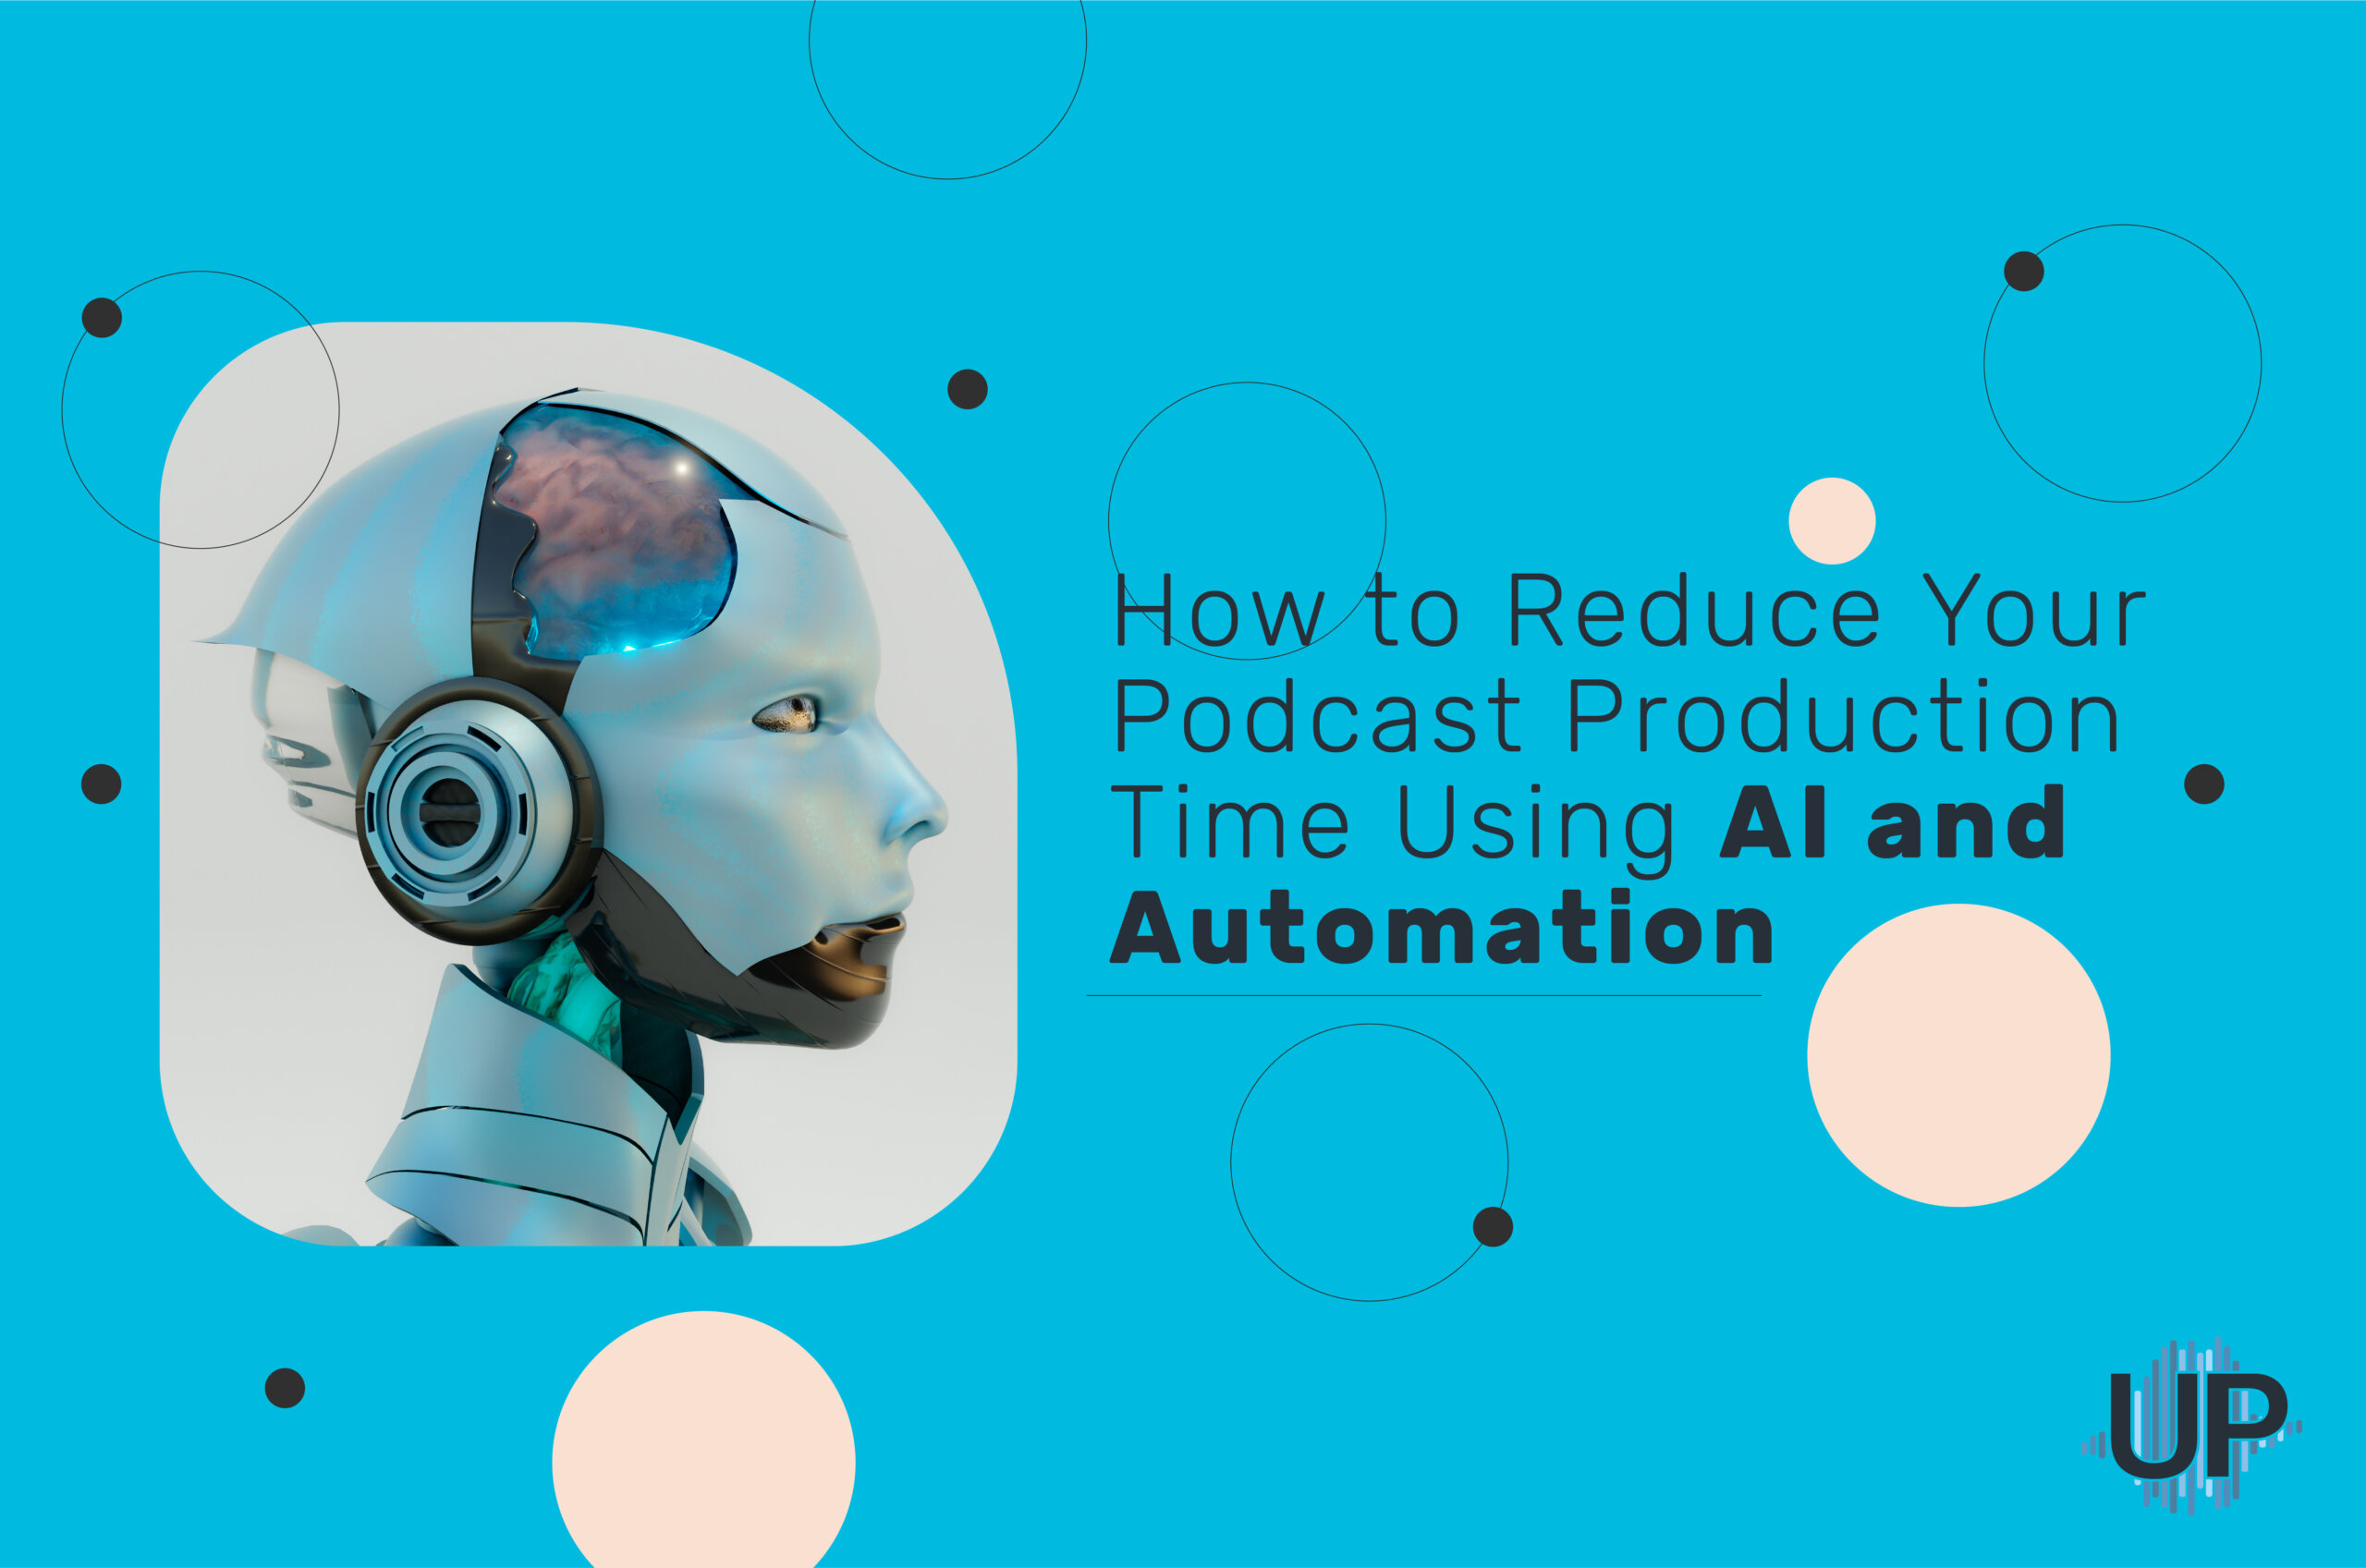 Featured image for “How to Reduce Your Podcast Production Time Using AI and Automation”